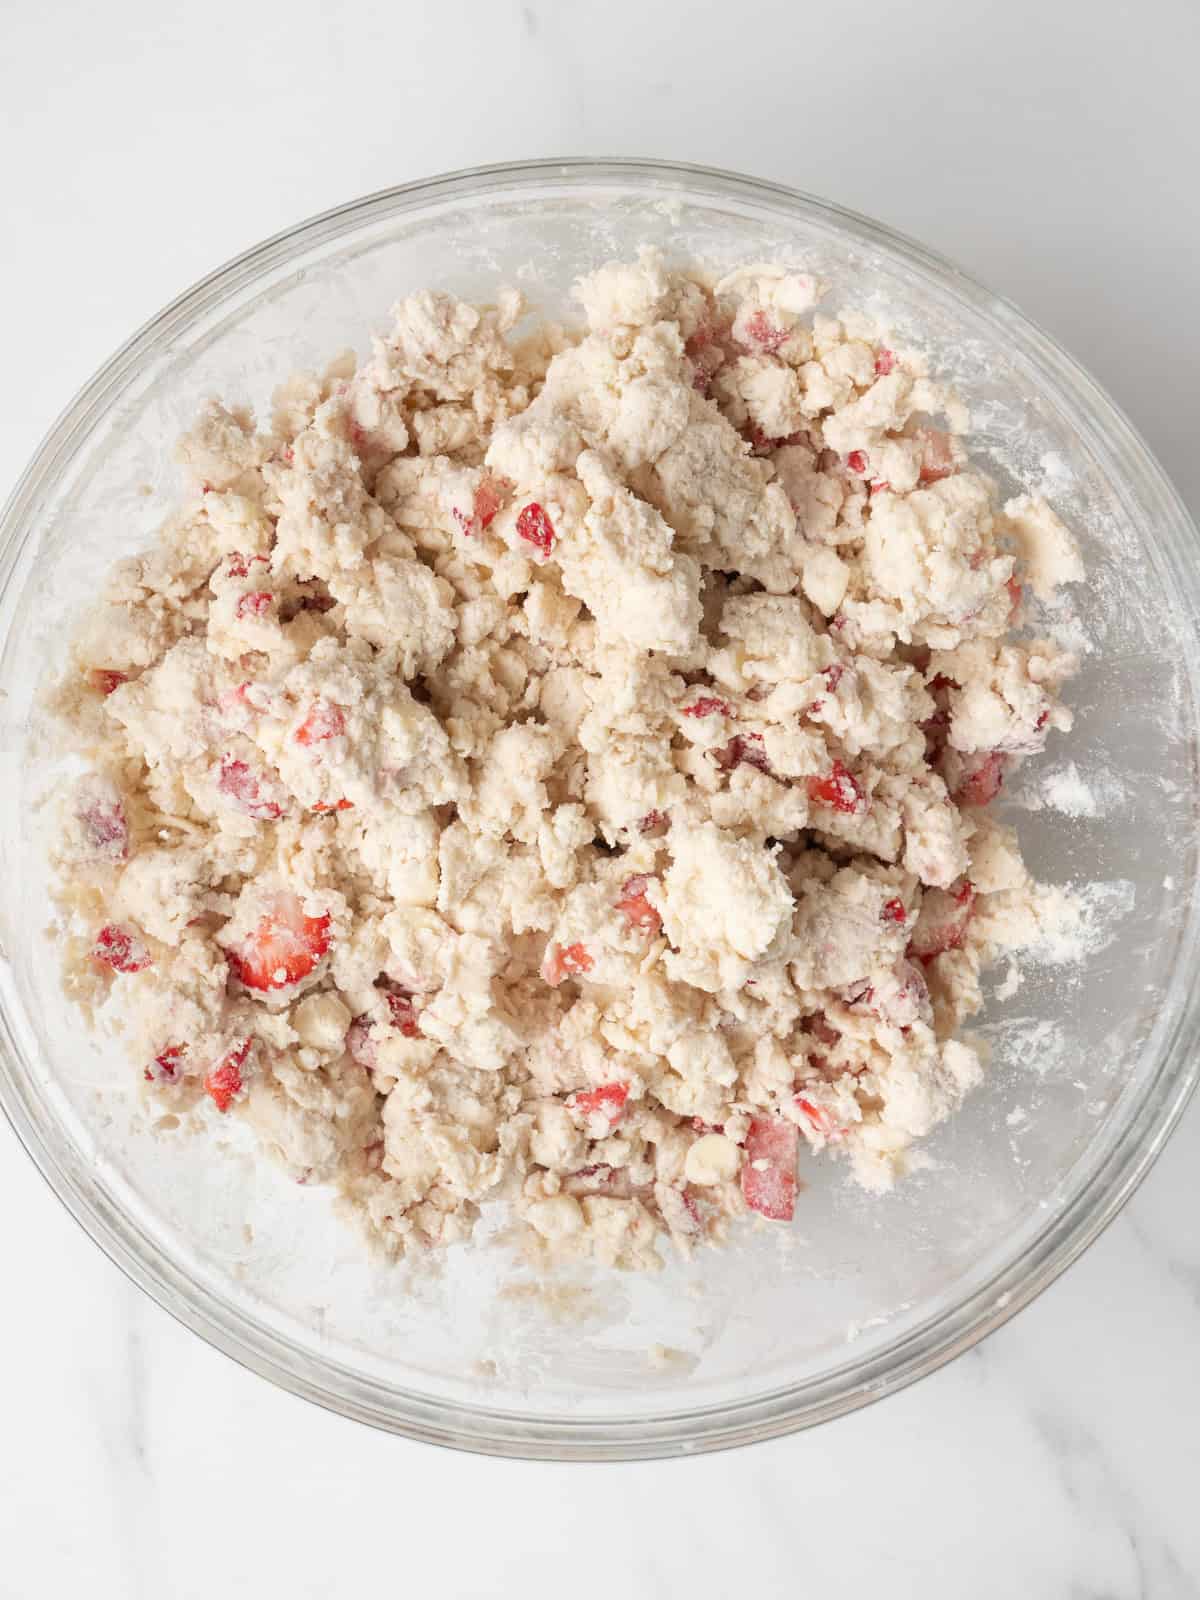 A large mixing bowl with the dough ready to make strawberry white chocolate scones.